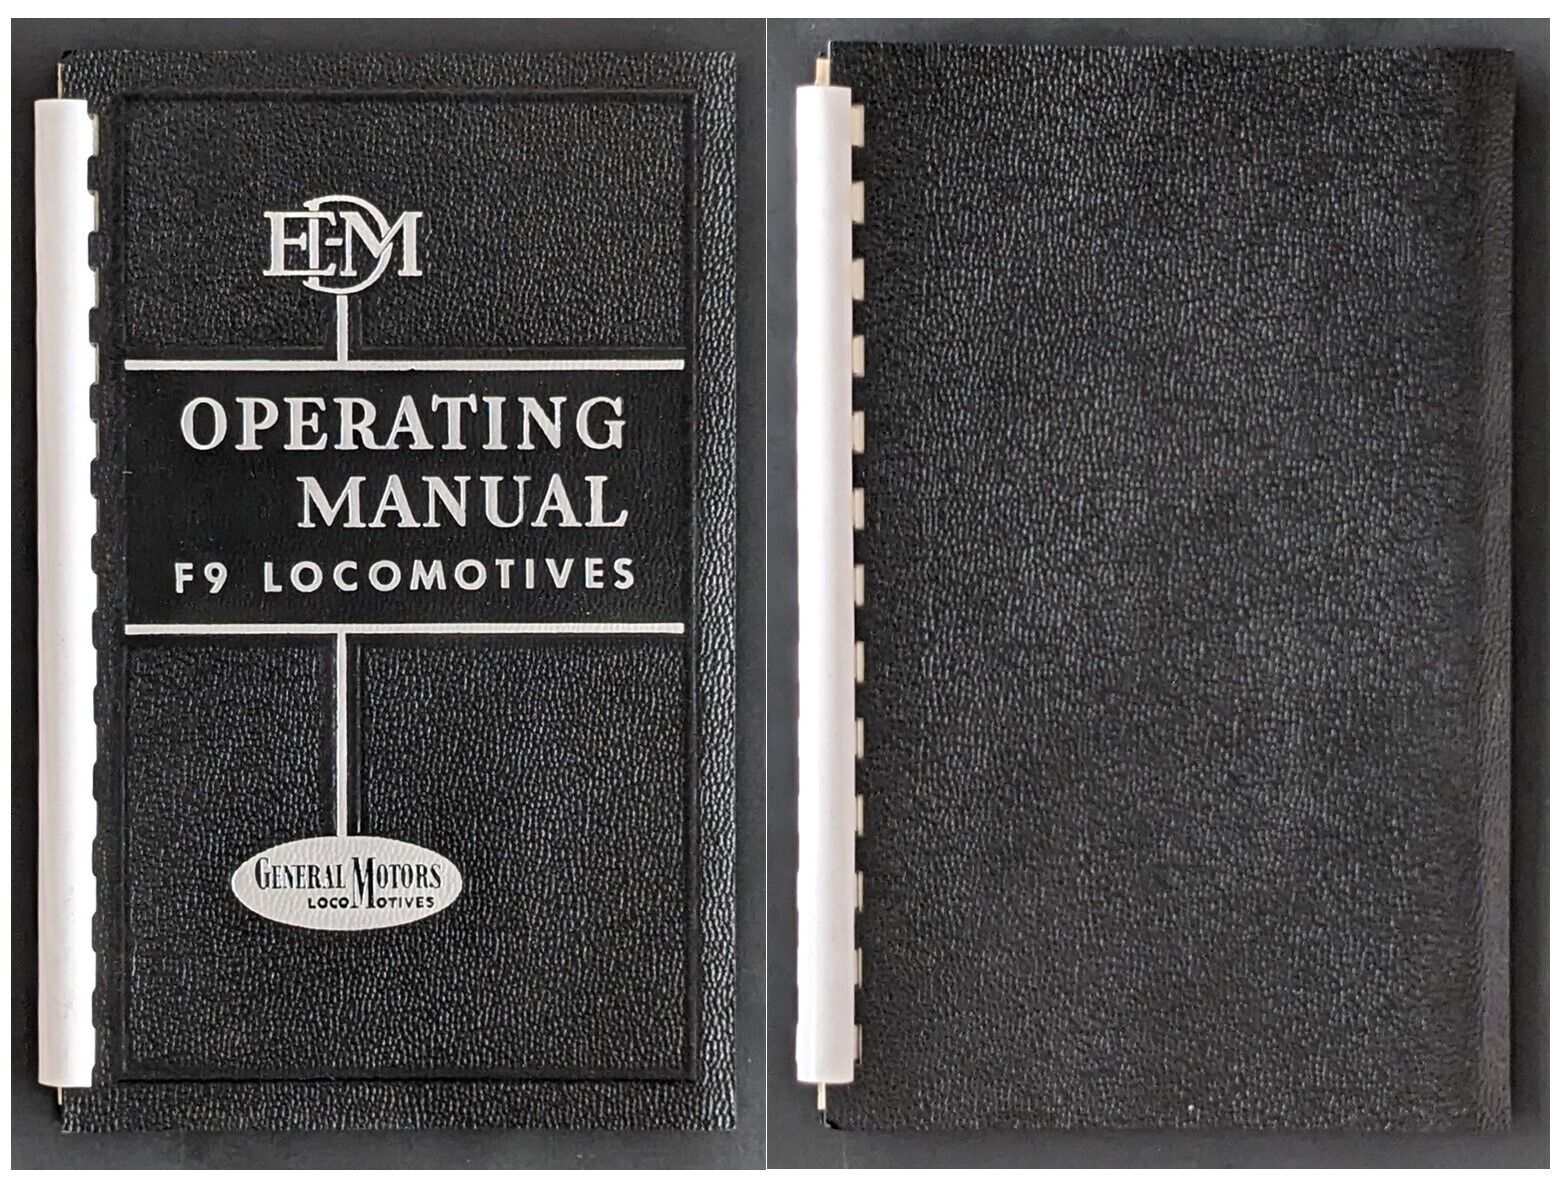 F9 DIESEL LOCOMOTIVES OPERATING MANUAL # 2315 - JULY 1957 2nd EDITION - MINT